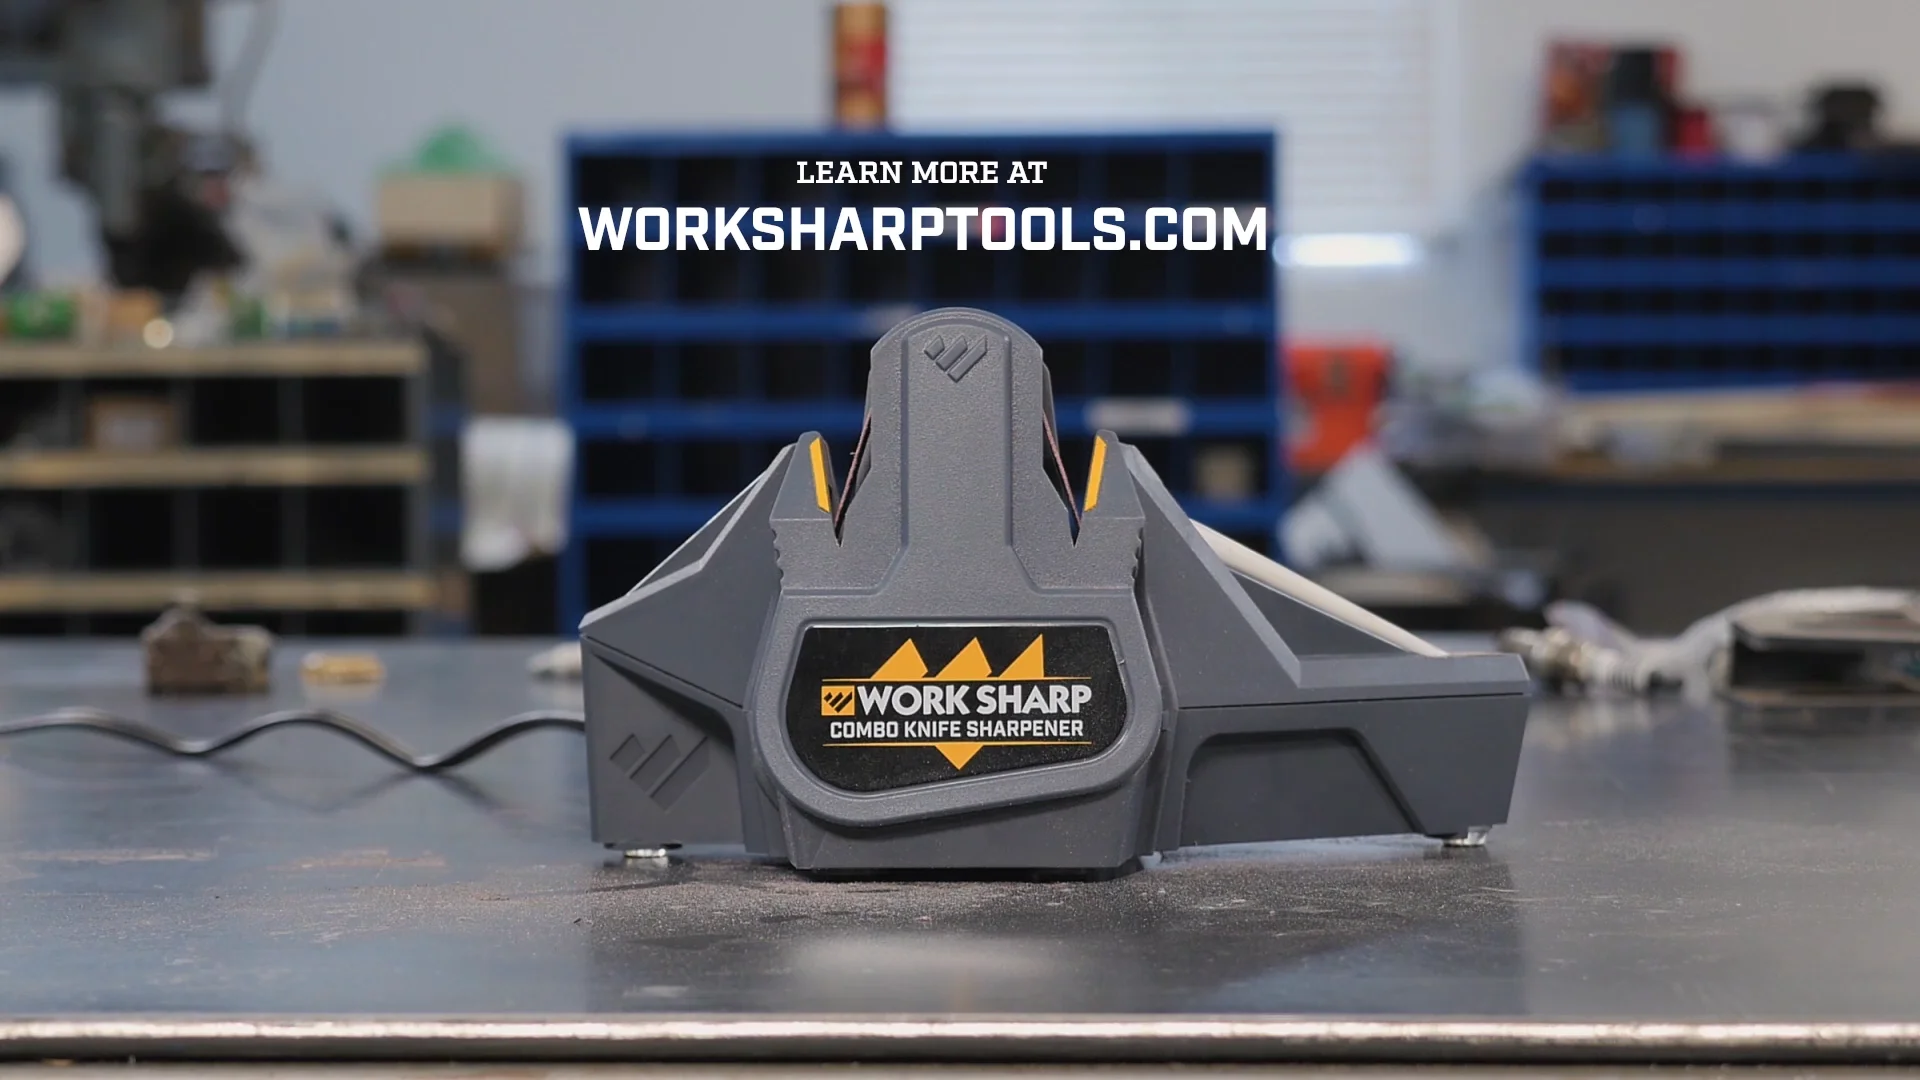 Sharpening a Multi-Tool with the Combo Knife Sharpener on Vimeo